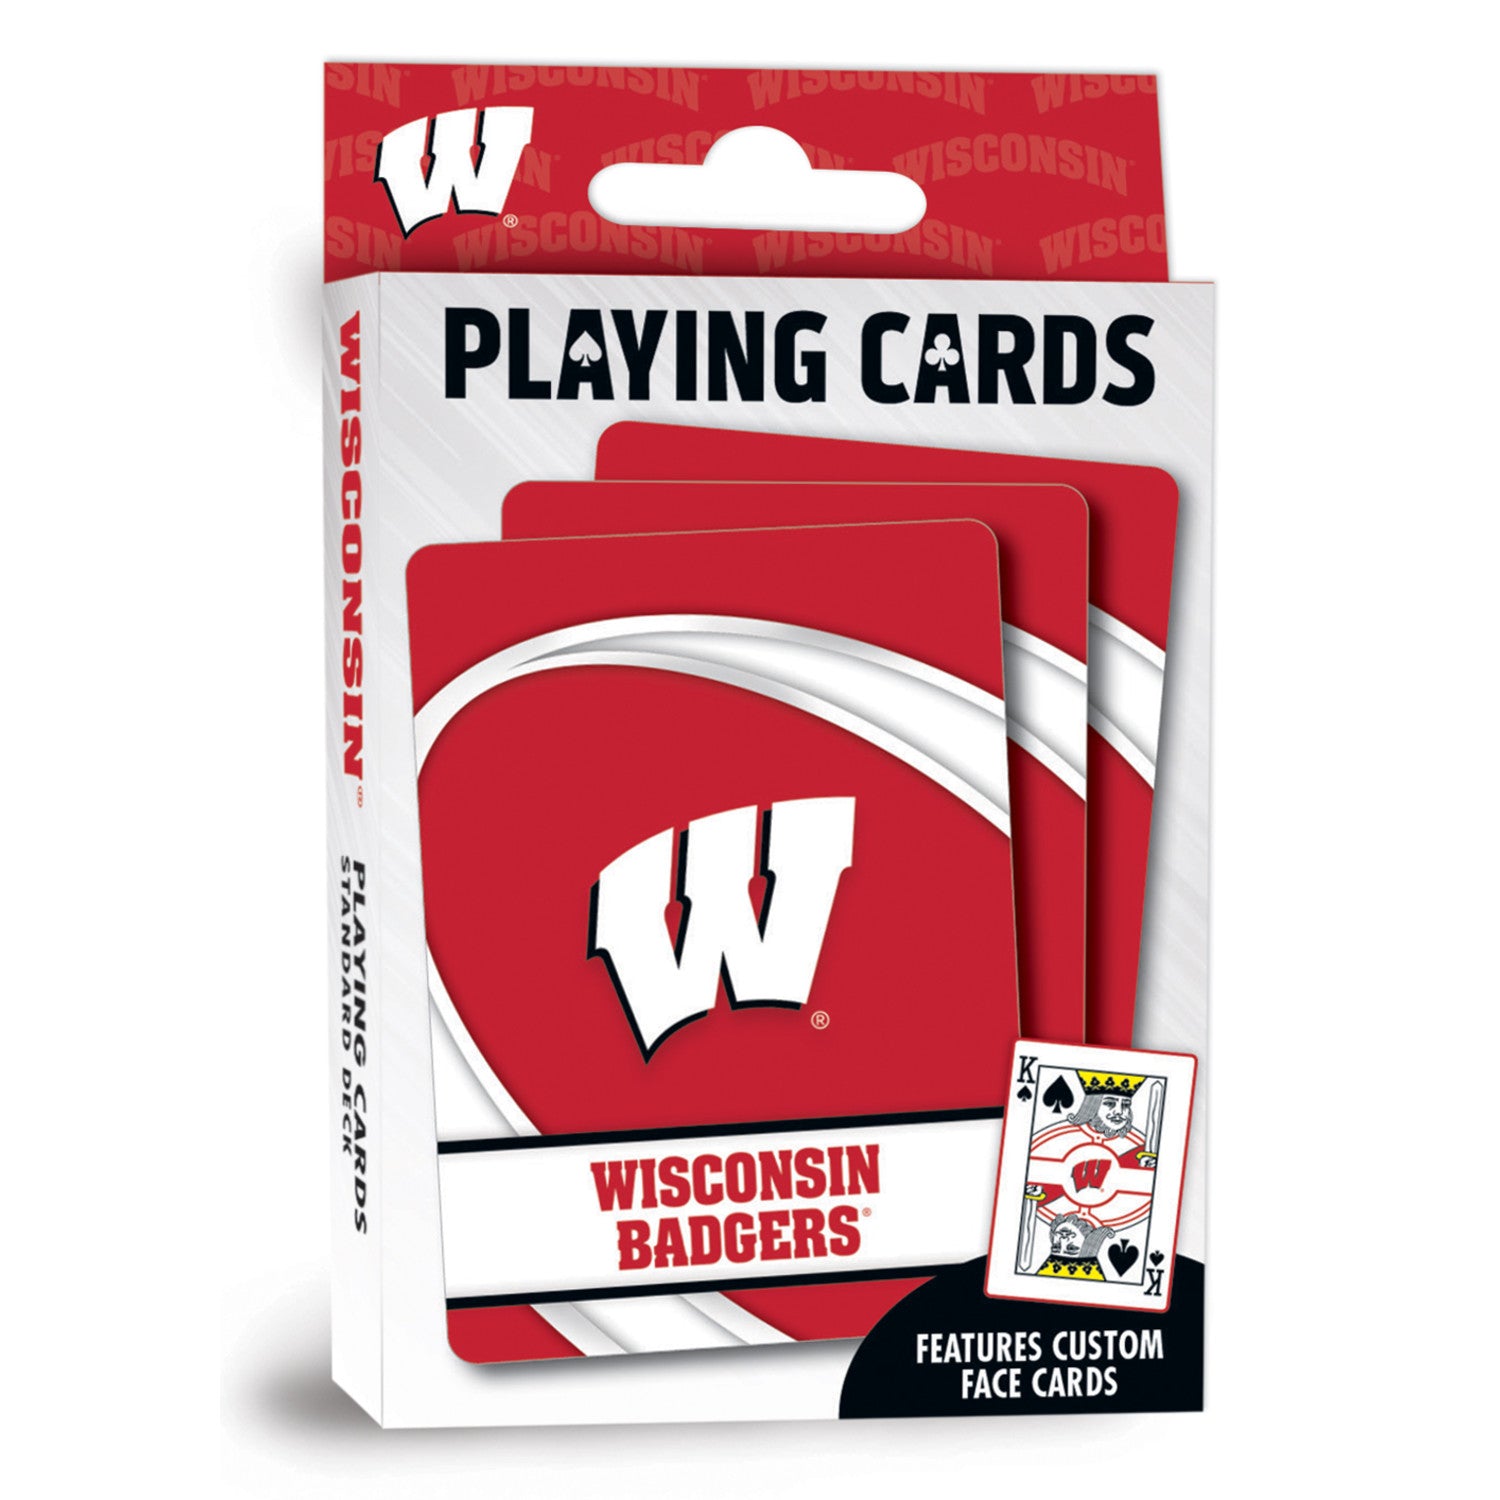 Wisconsin Badgers Playing Cards - 54 Card Deck